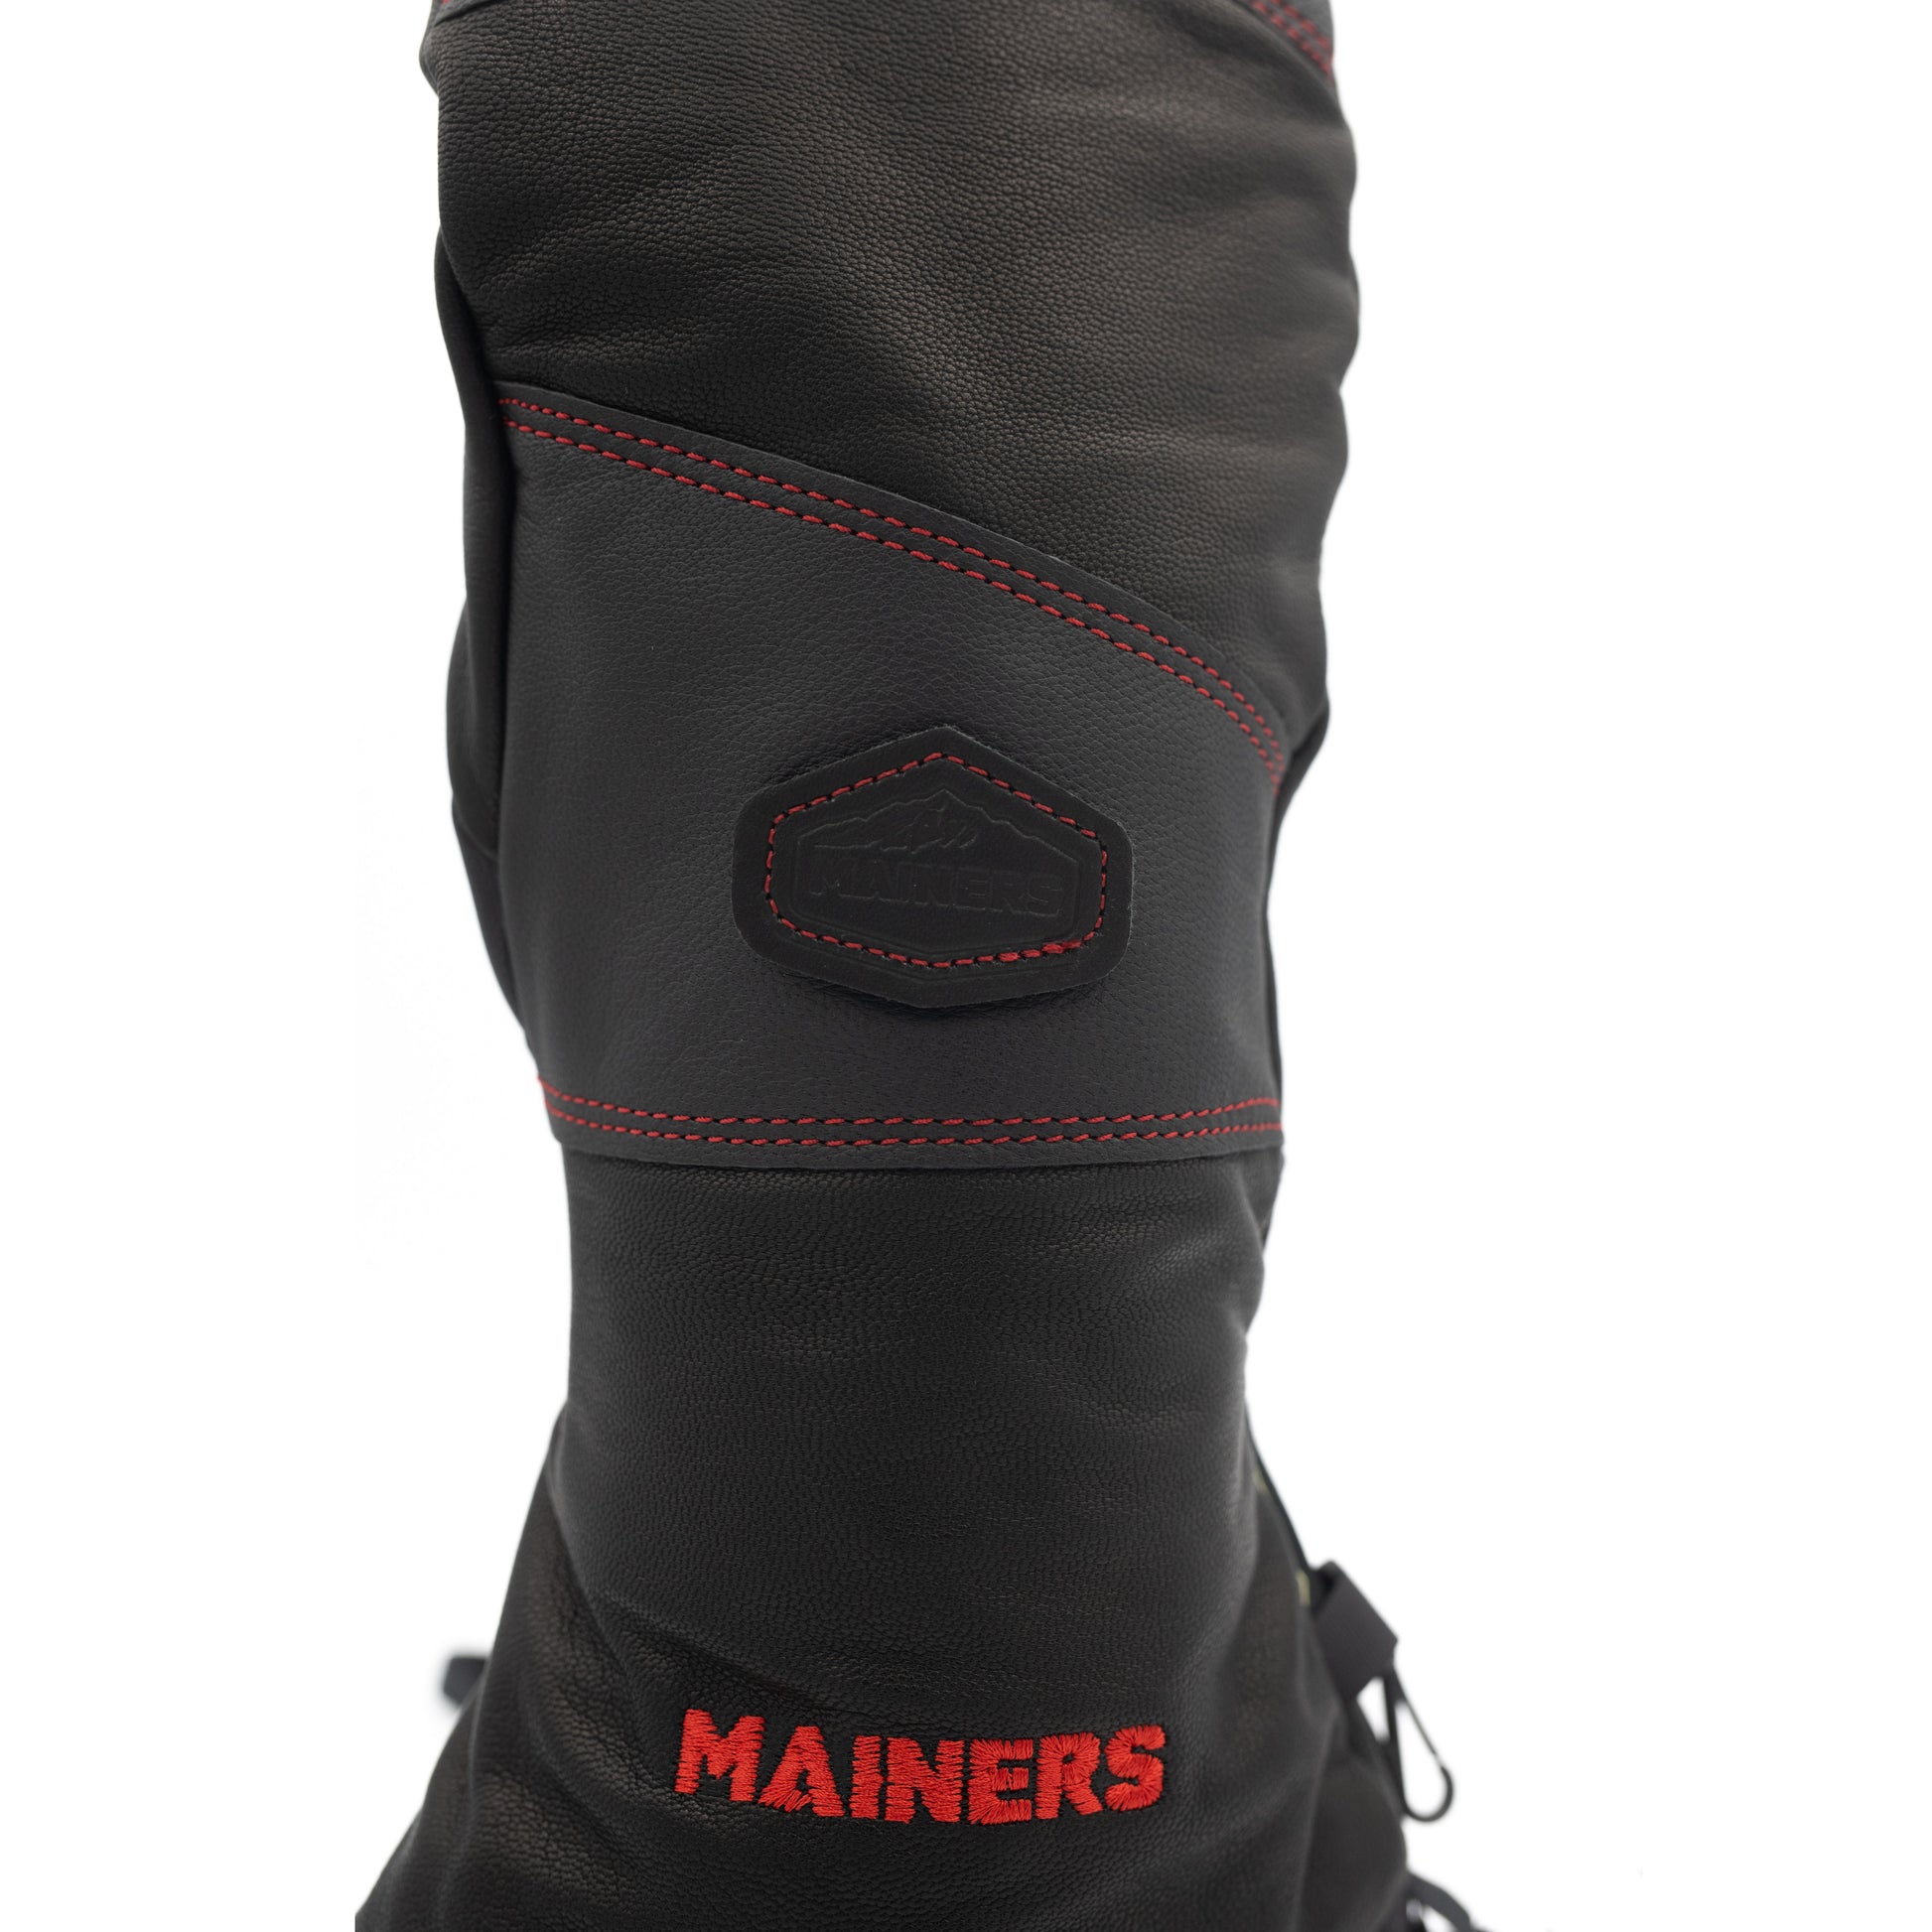 A pair of cold-weather black leather Mainers boots with red stitching.